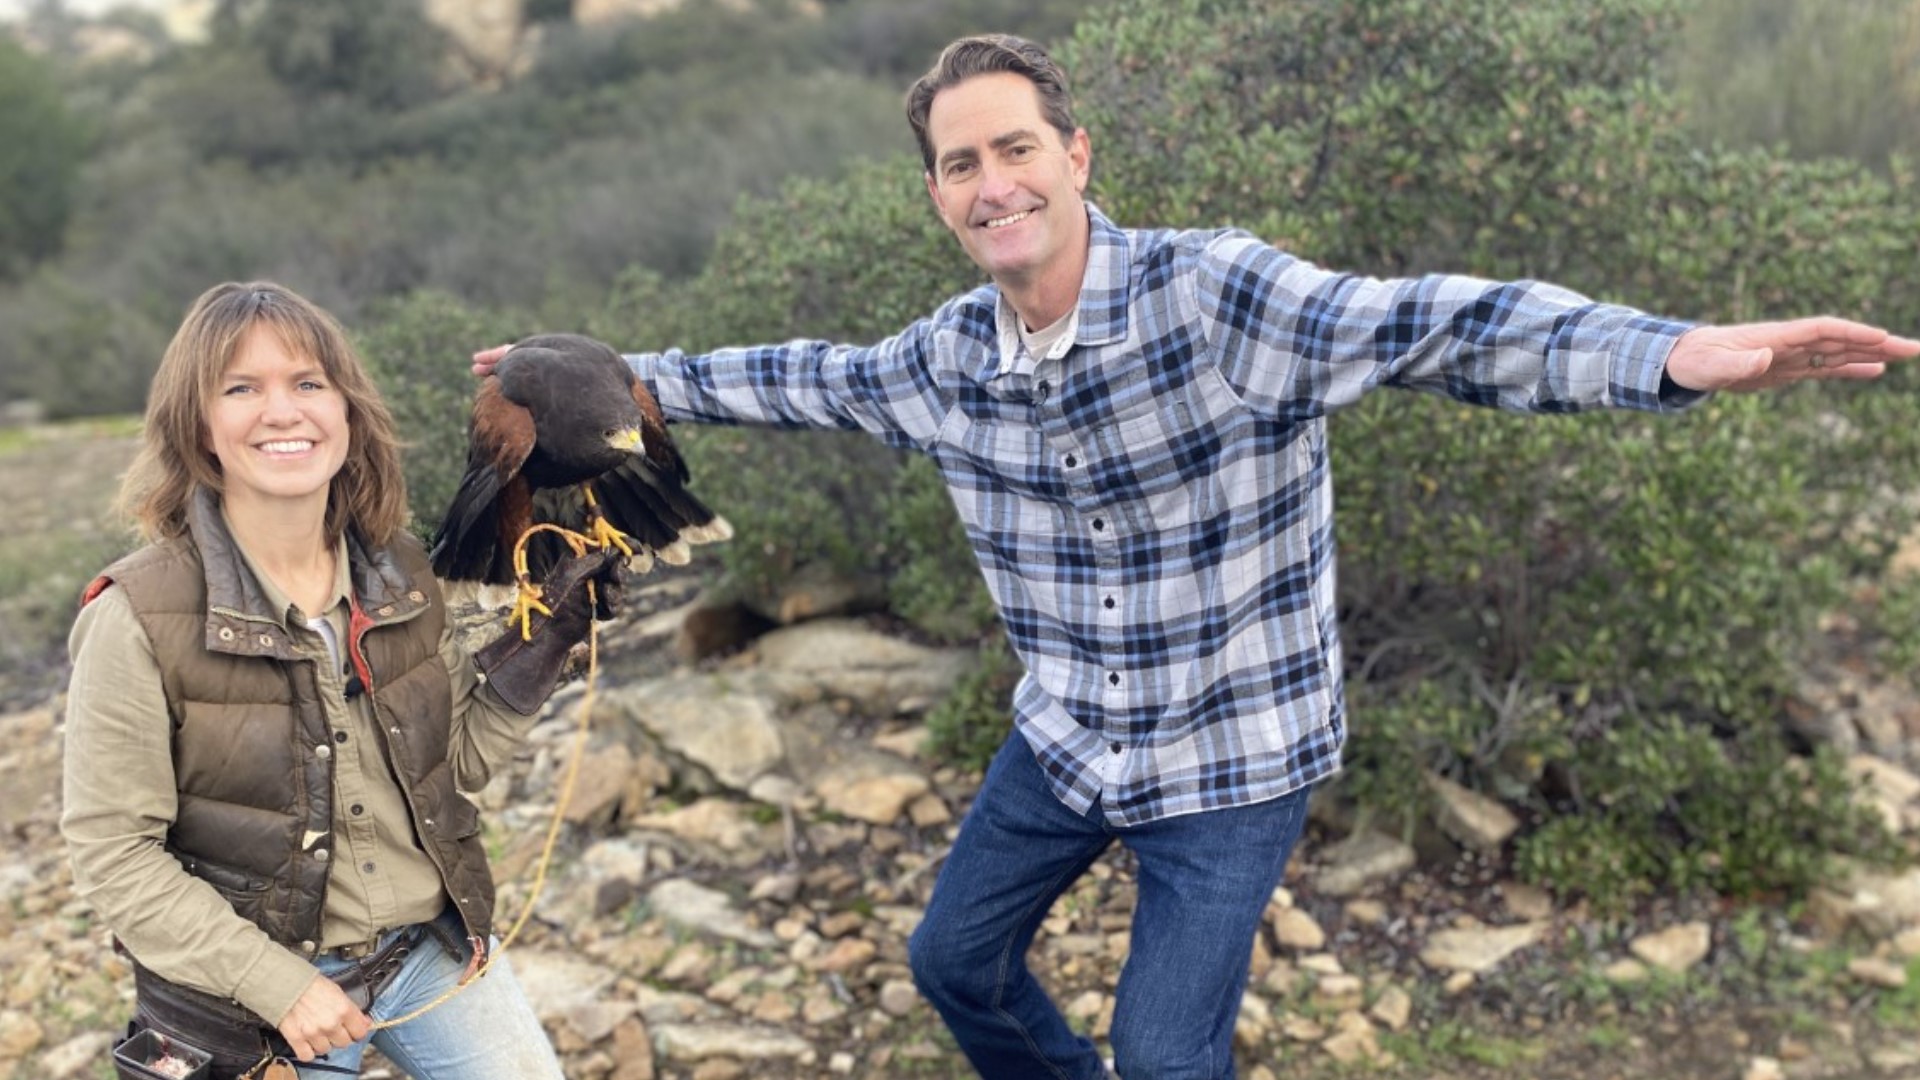 Families flock to Escondido bird ranch to connect with nature for the holidays.